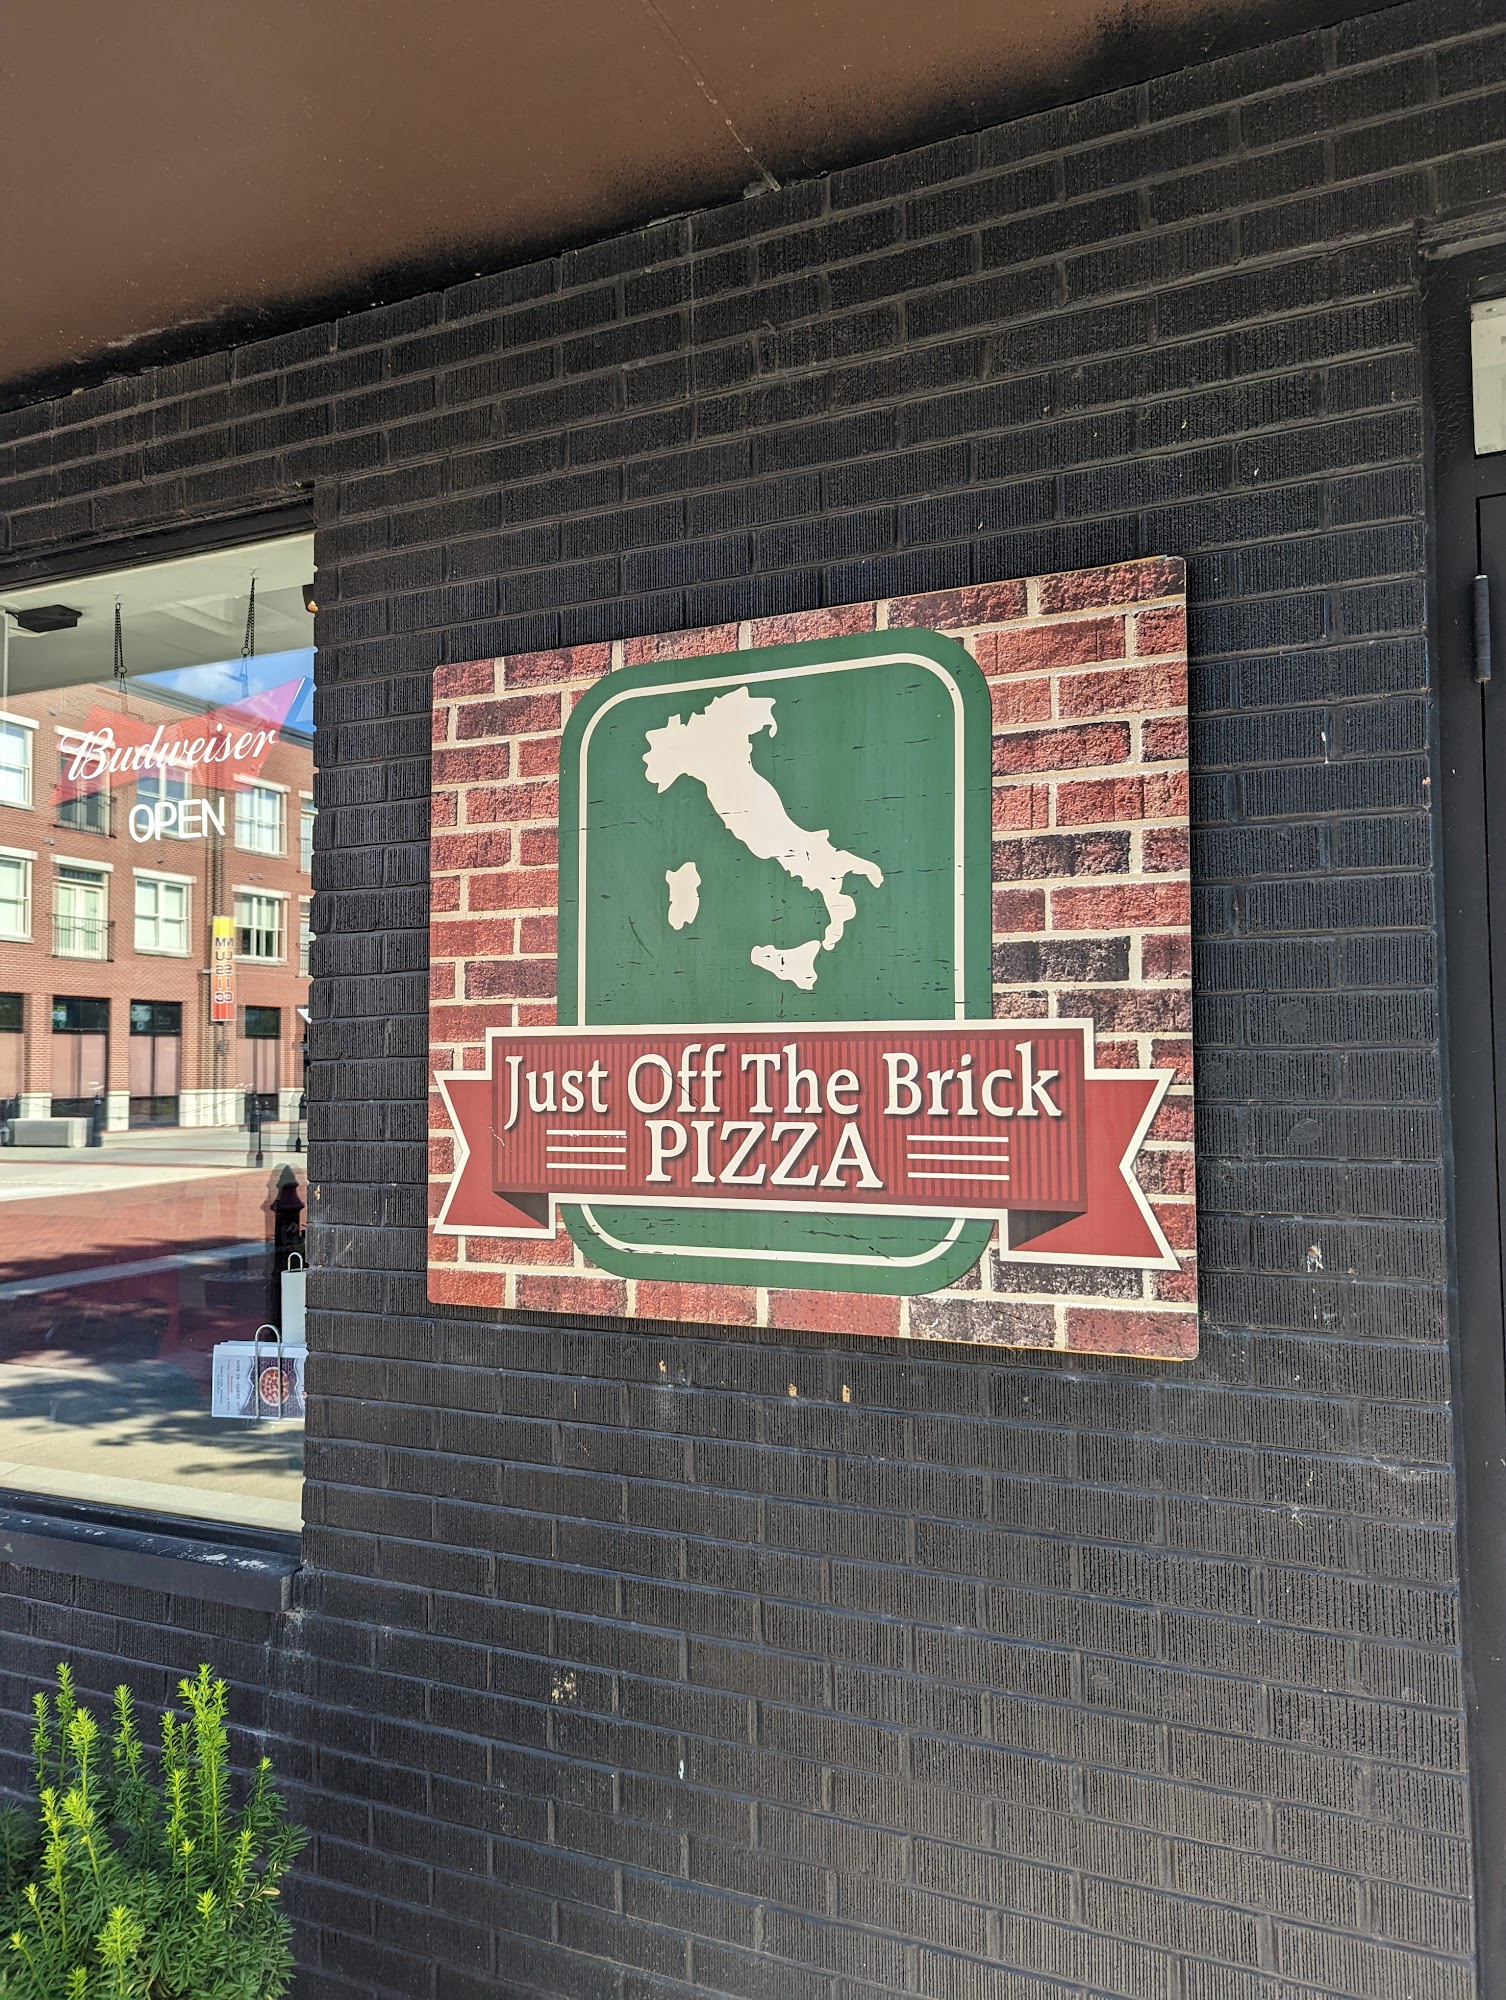 Just Off The Brick Pizza